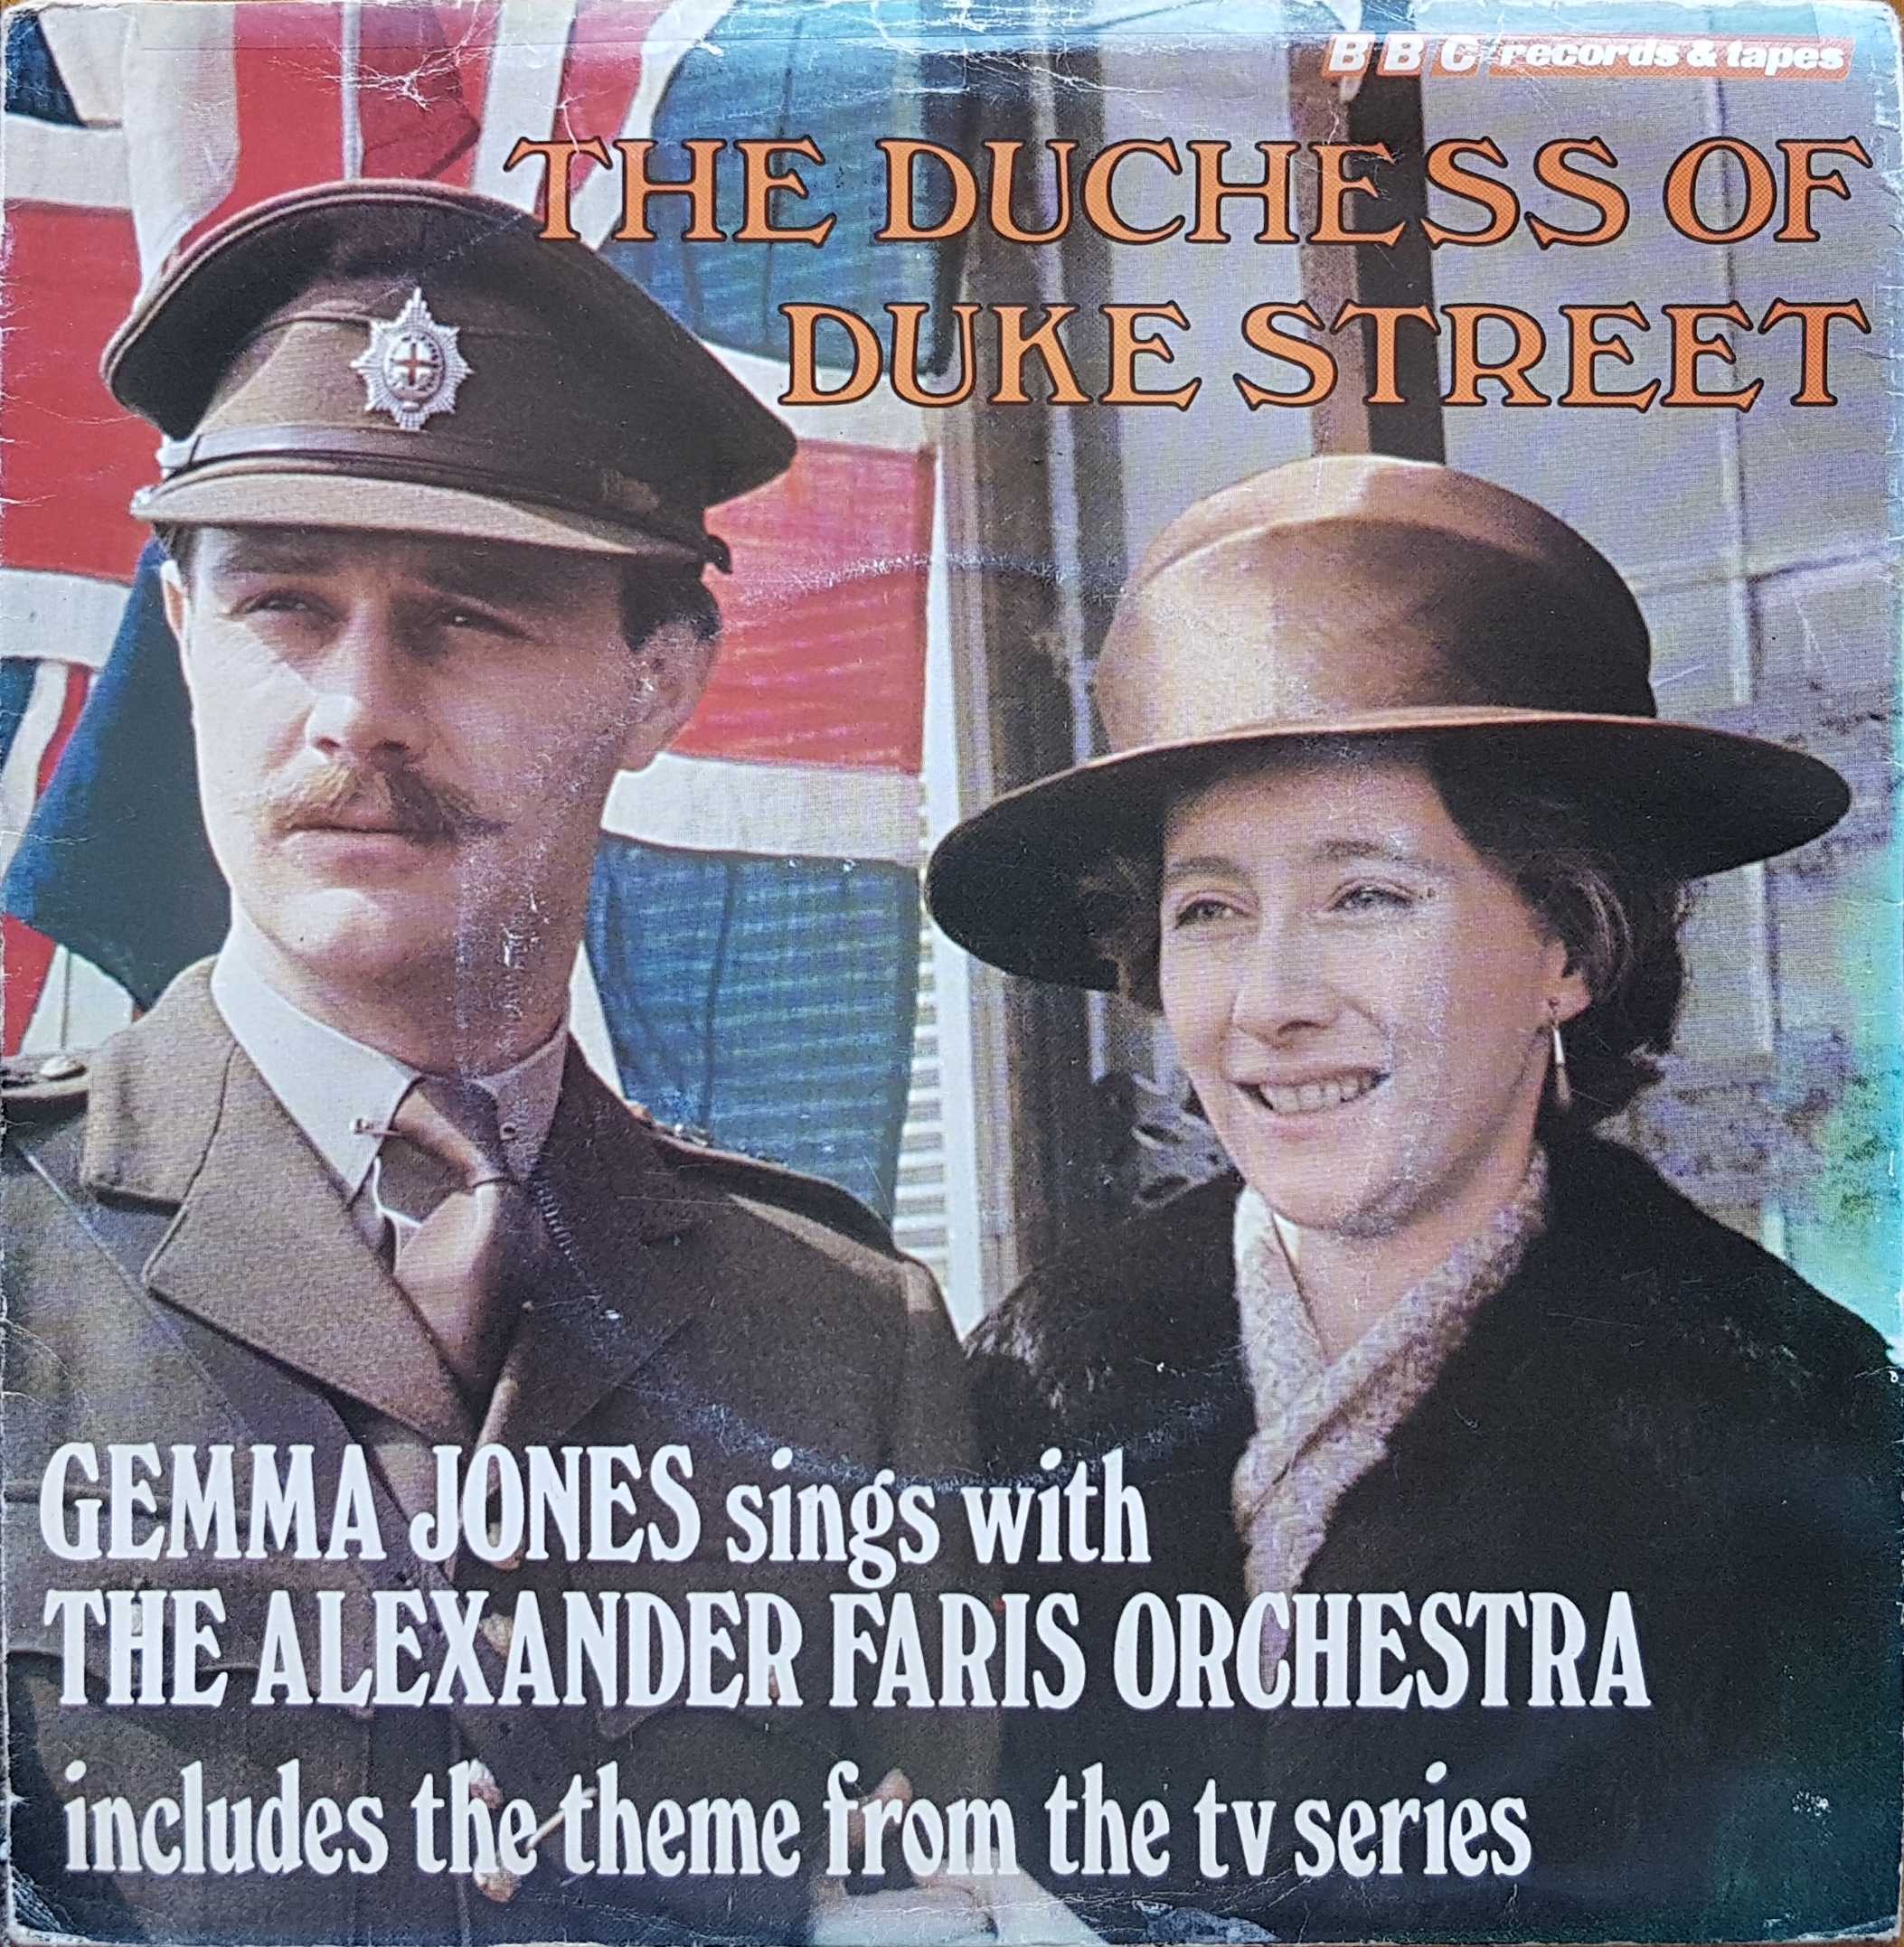 Picture of RESL 45 The Duchess of Duke Street by artist Alexander Faris from the BBC records and Tapes library